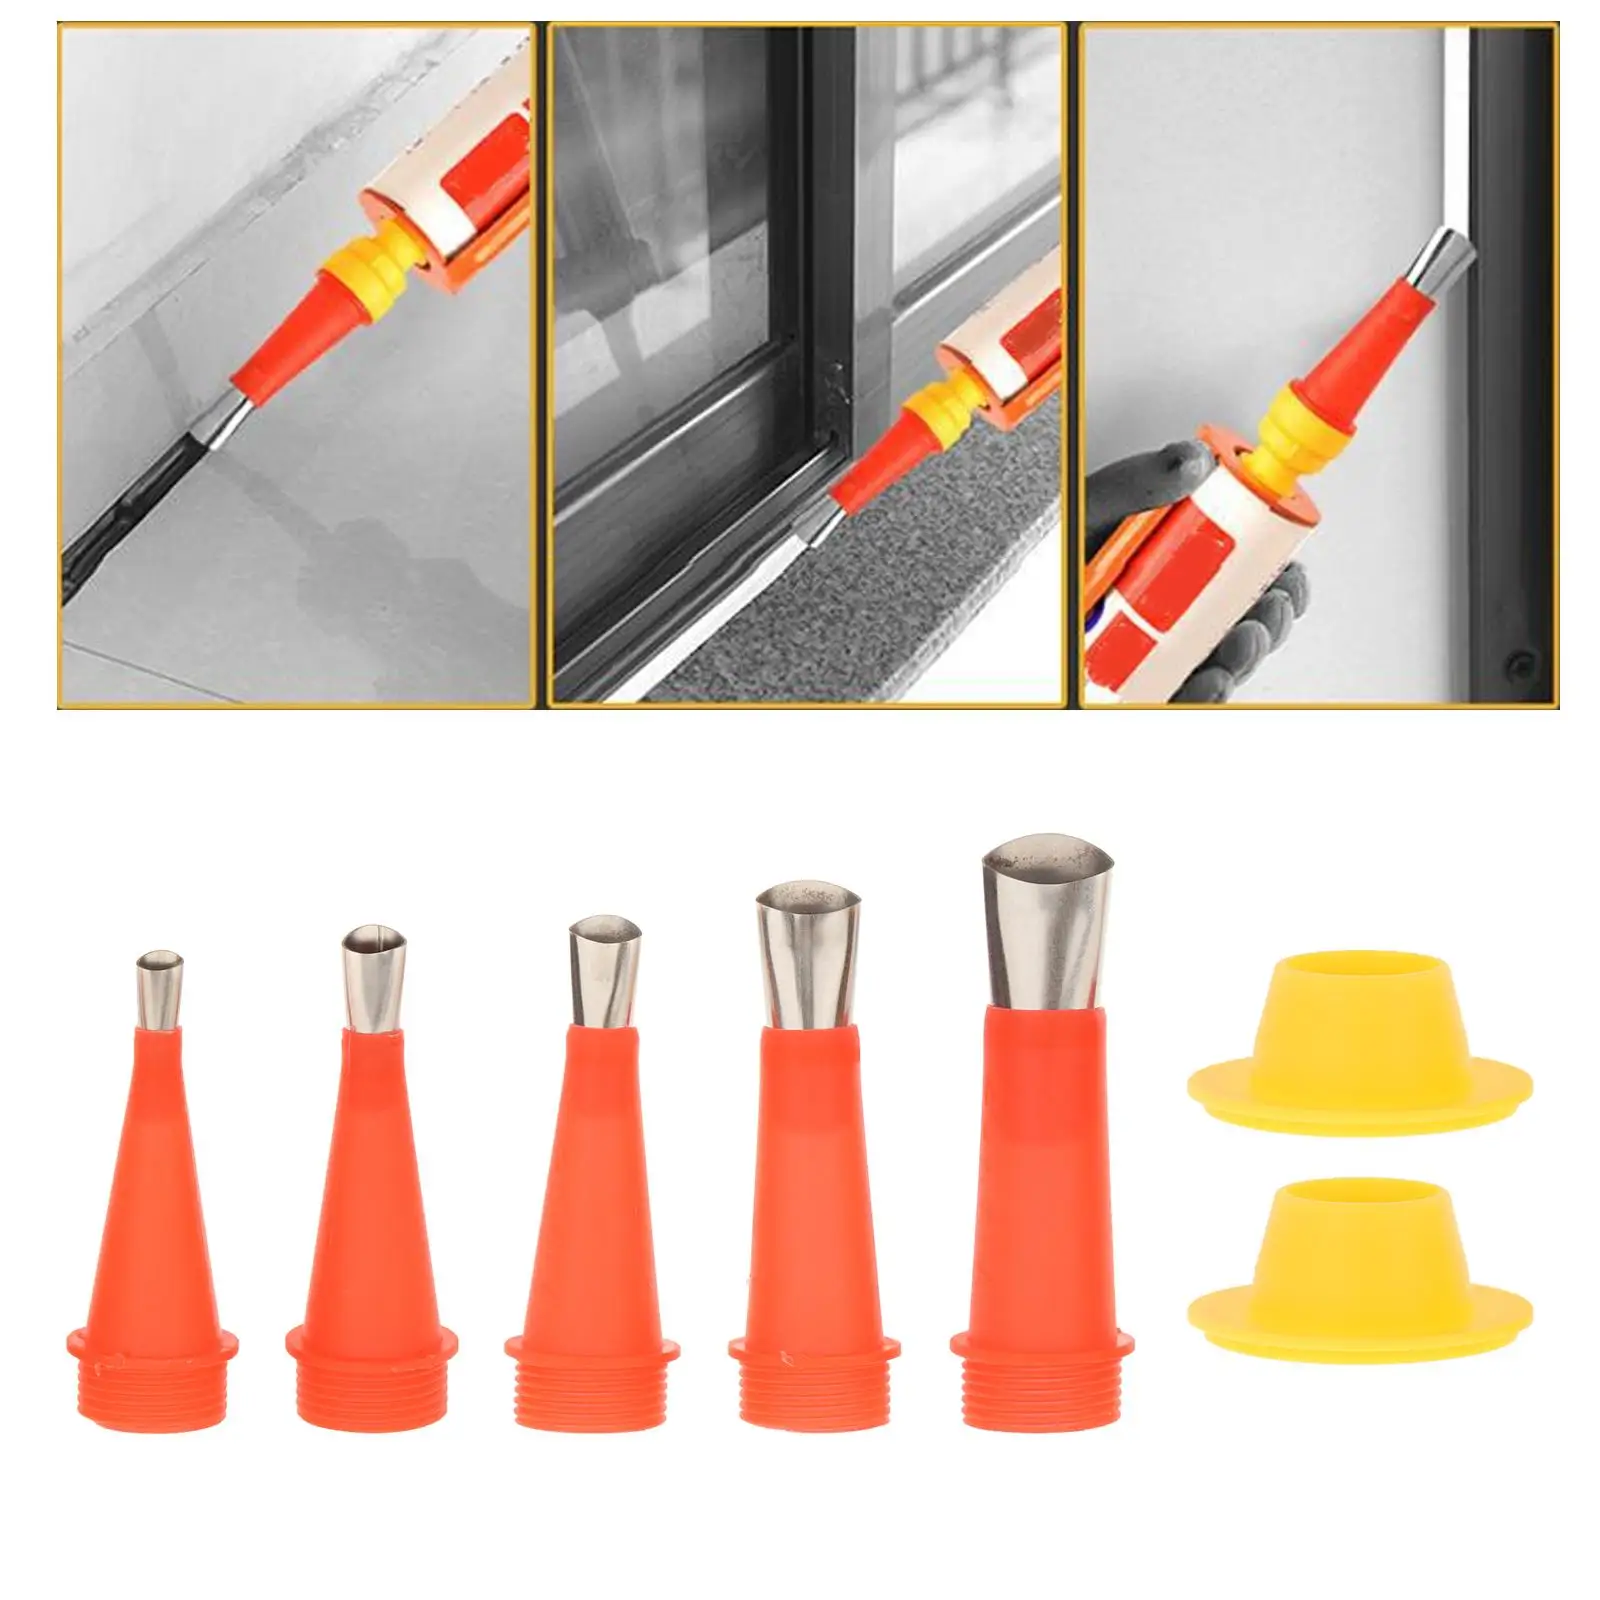 7x Reusable Caulking Nozzle Tool Set with Connection Bases Replacement Caulking Finisher Nozzle Kit for Bathroom Home Window